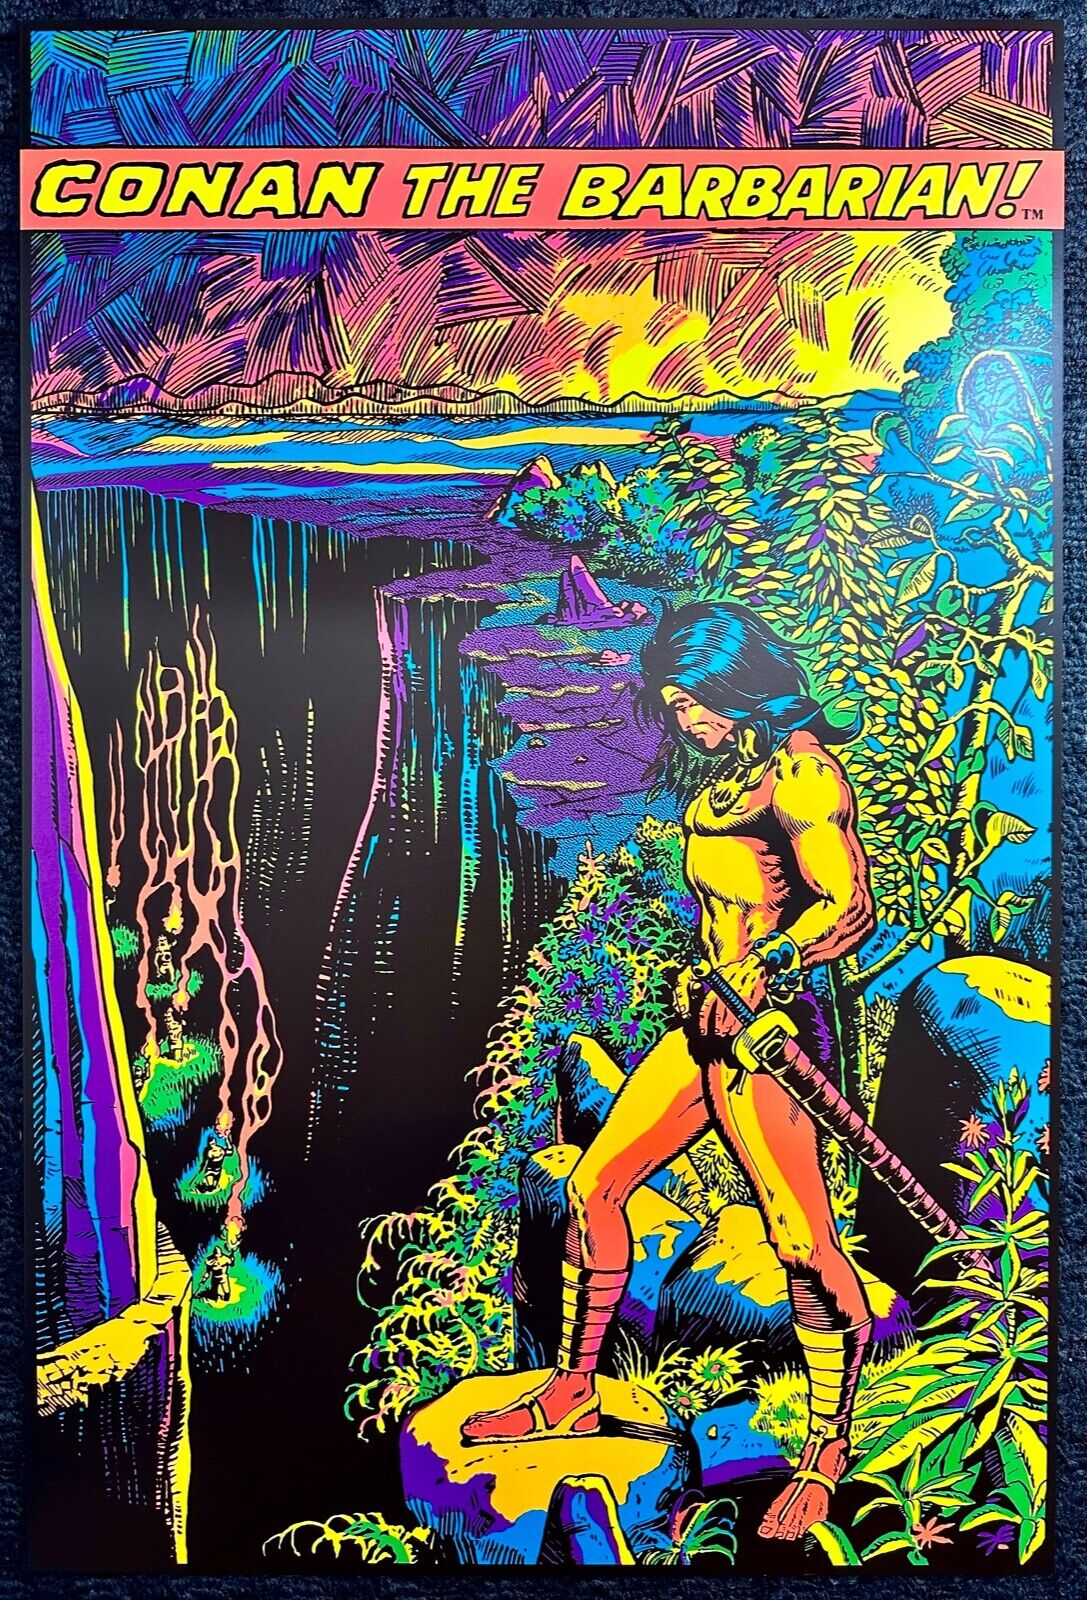 Conan the Barbarian Black Light Marvel Comic Poster by Barry Windsor-Smith